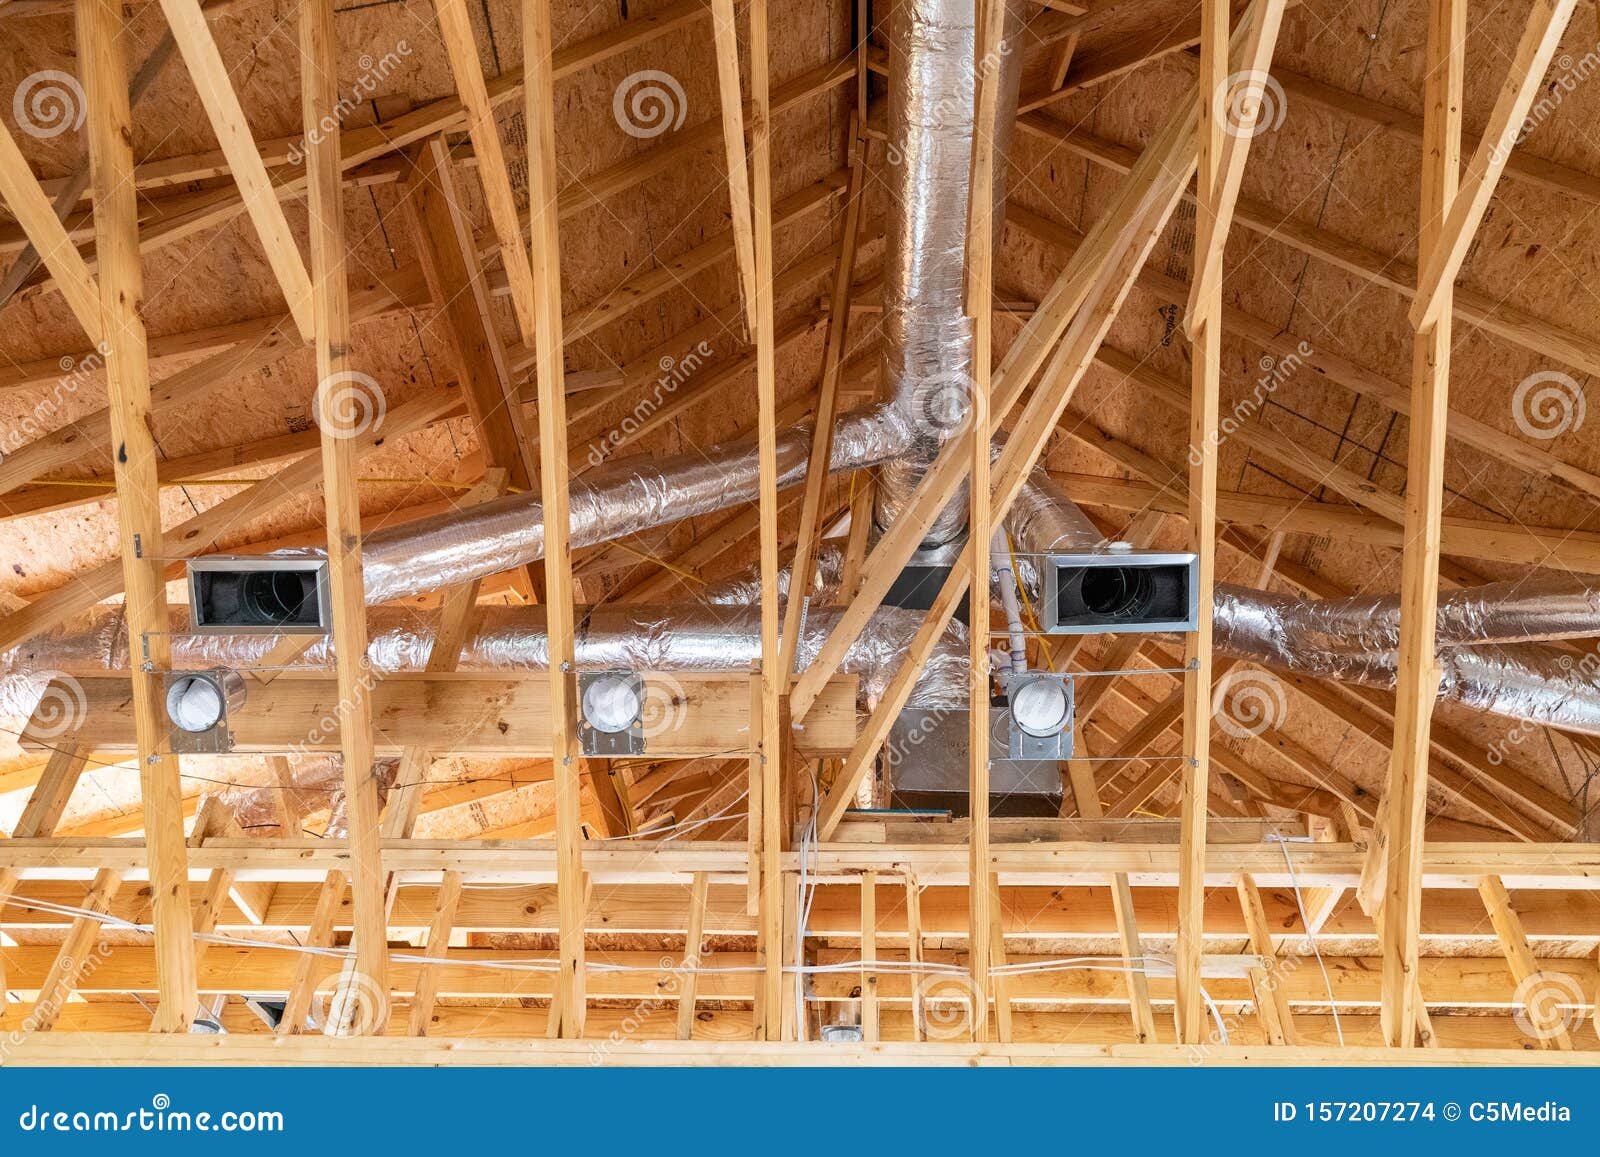 New Air Conditioner Ductwork In New Home Construction Stock Photo